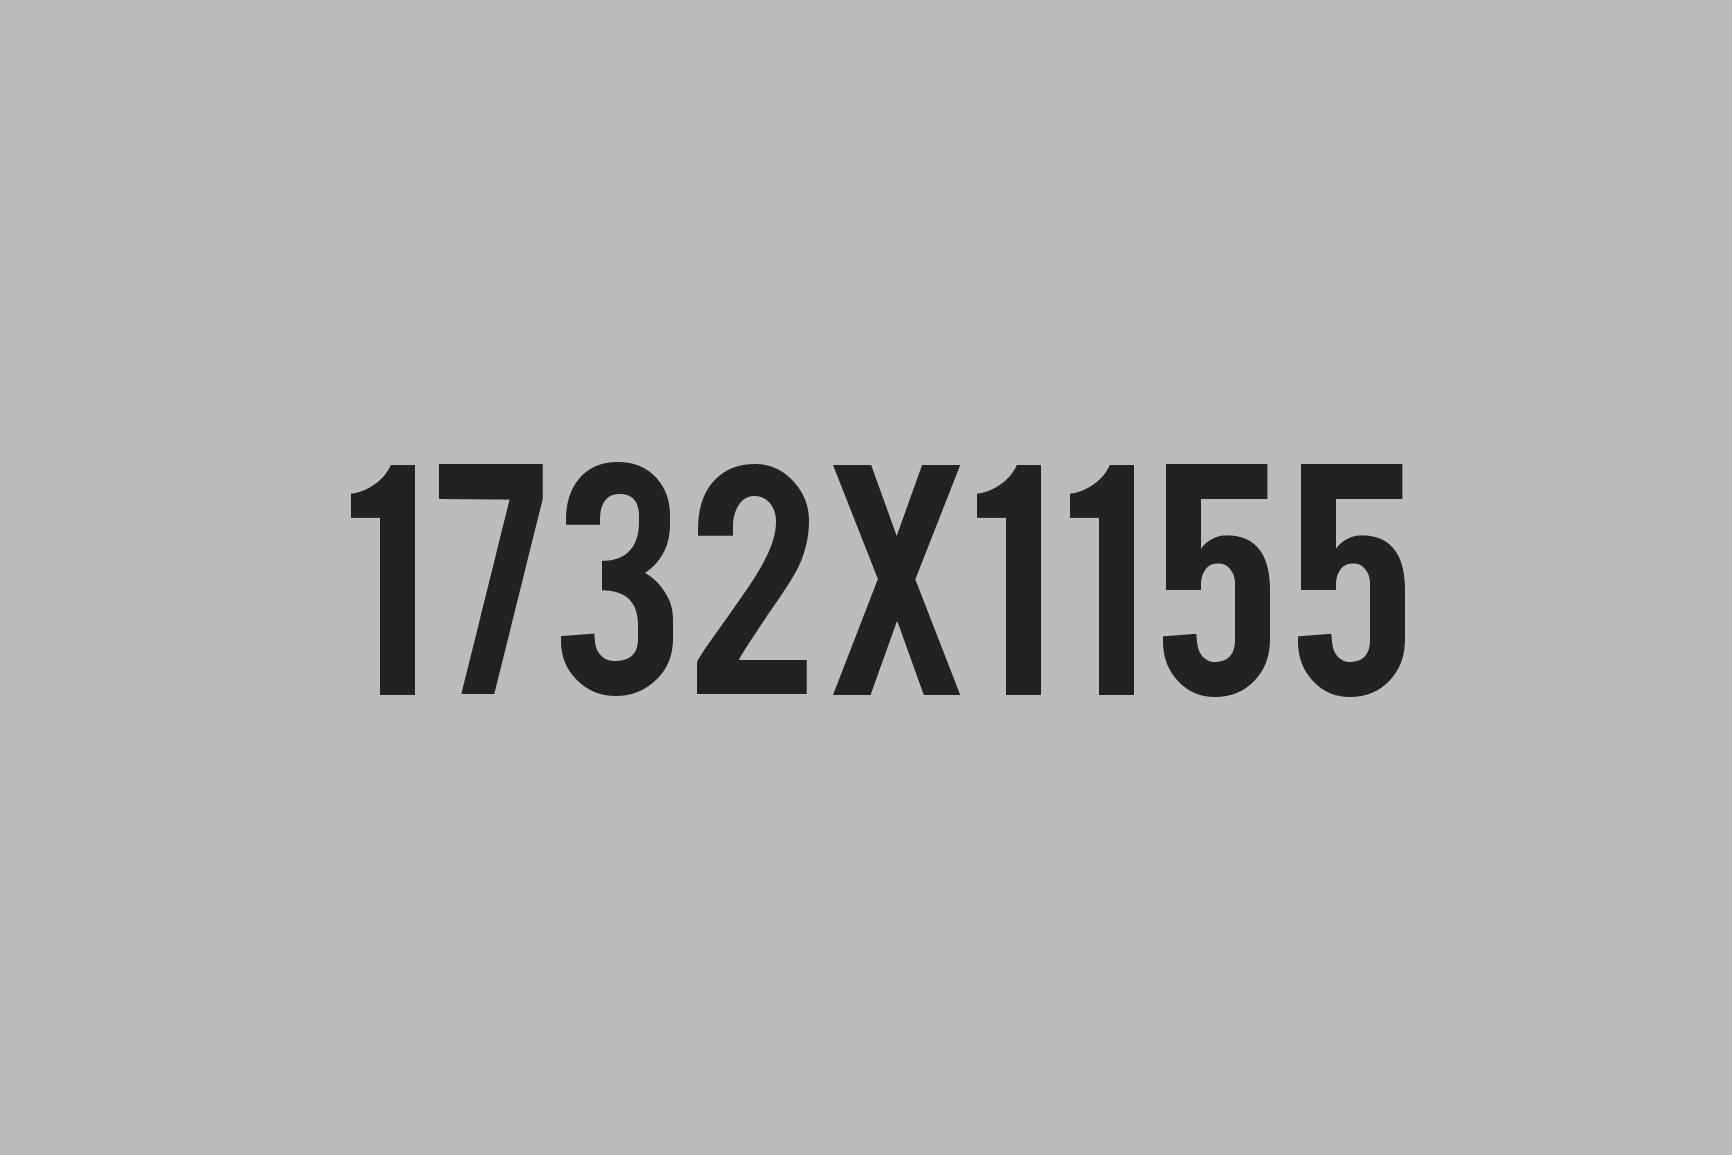 A gray background with numbers on it.